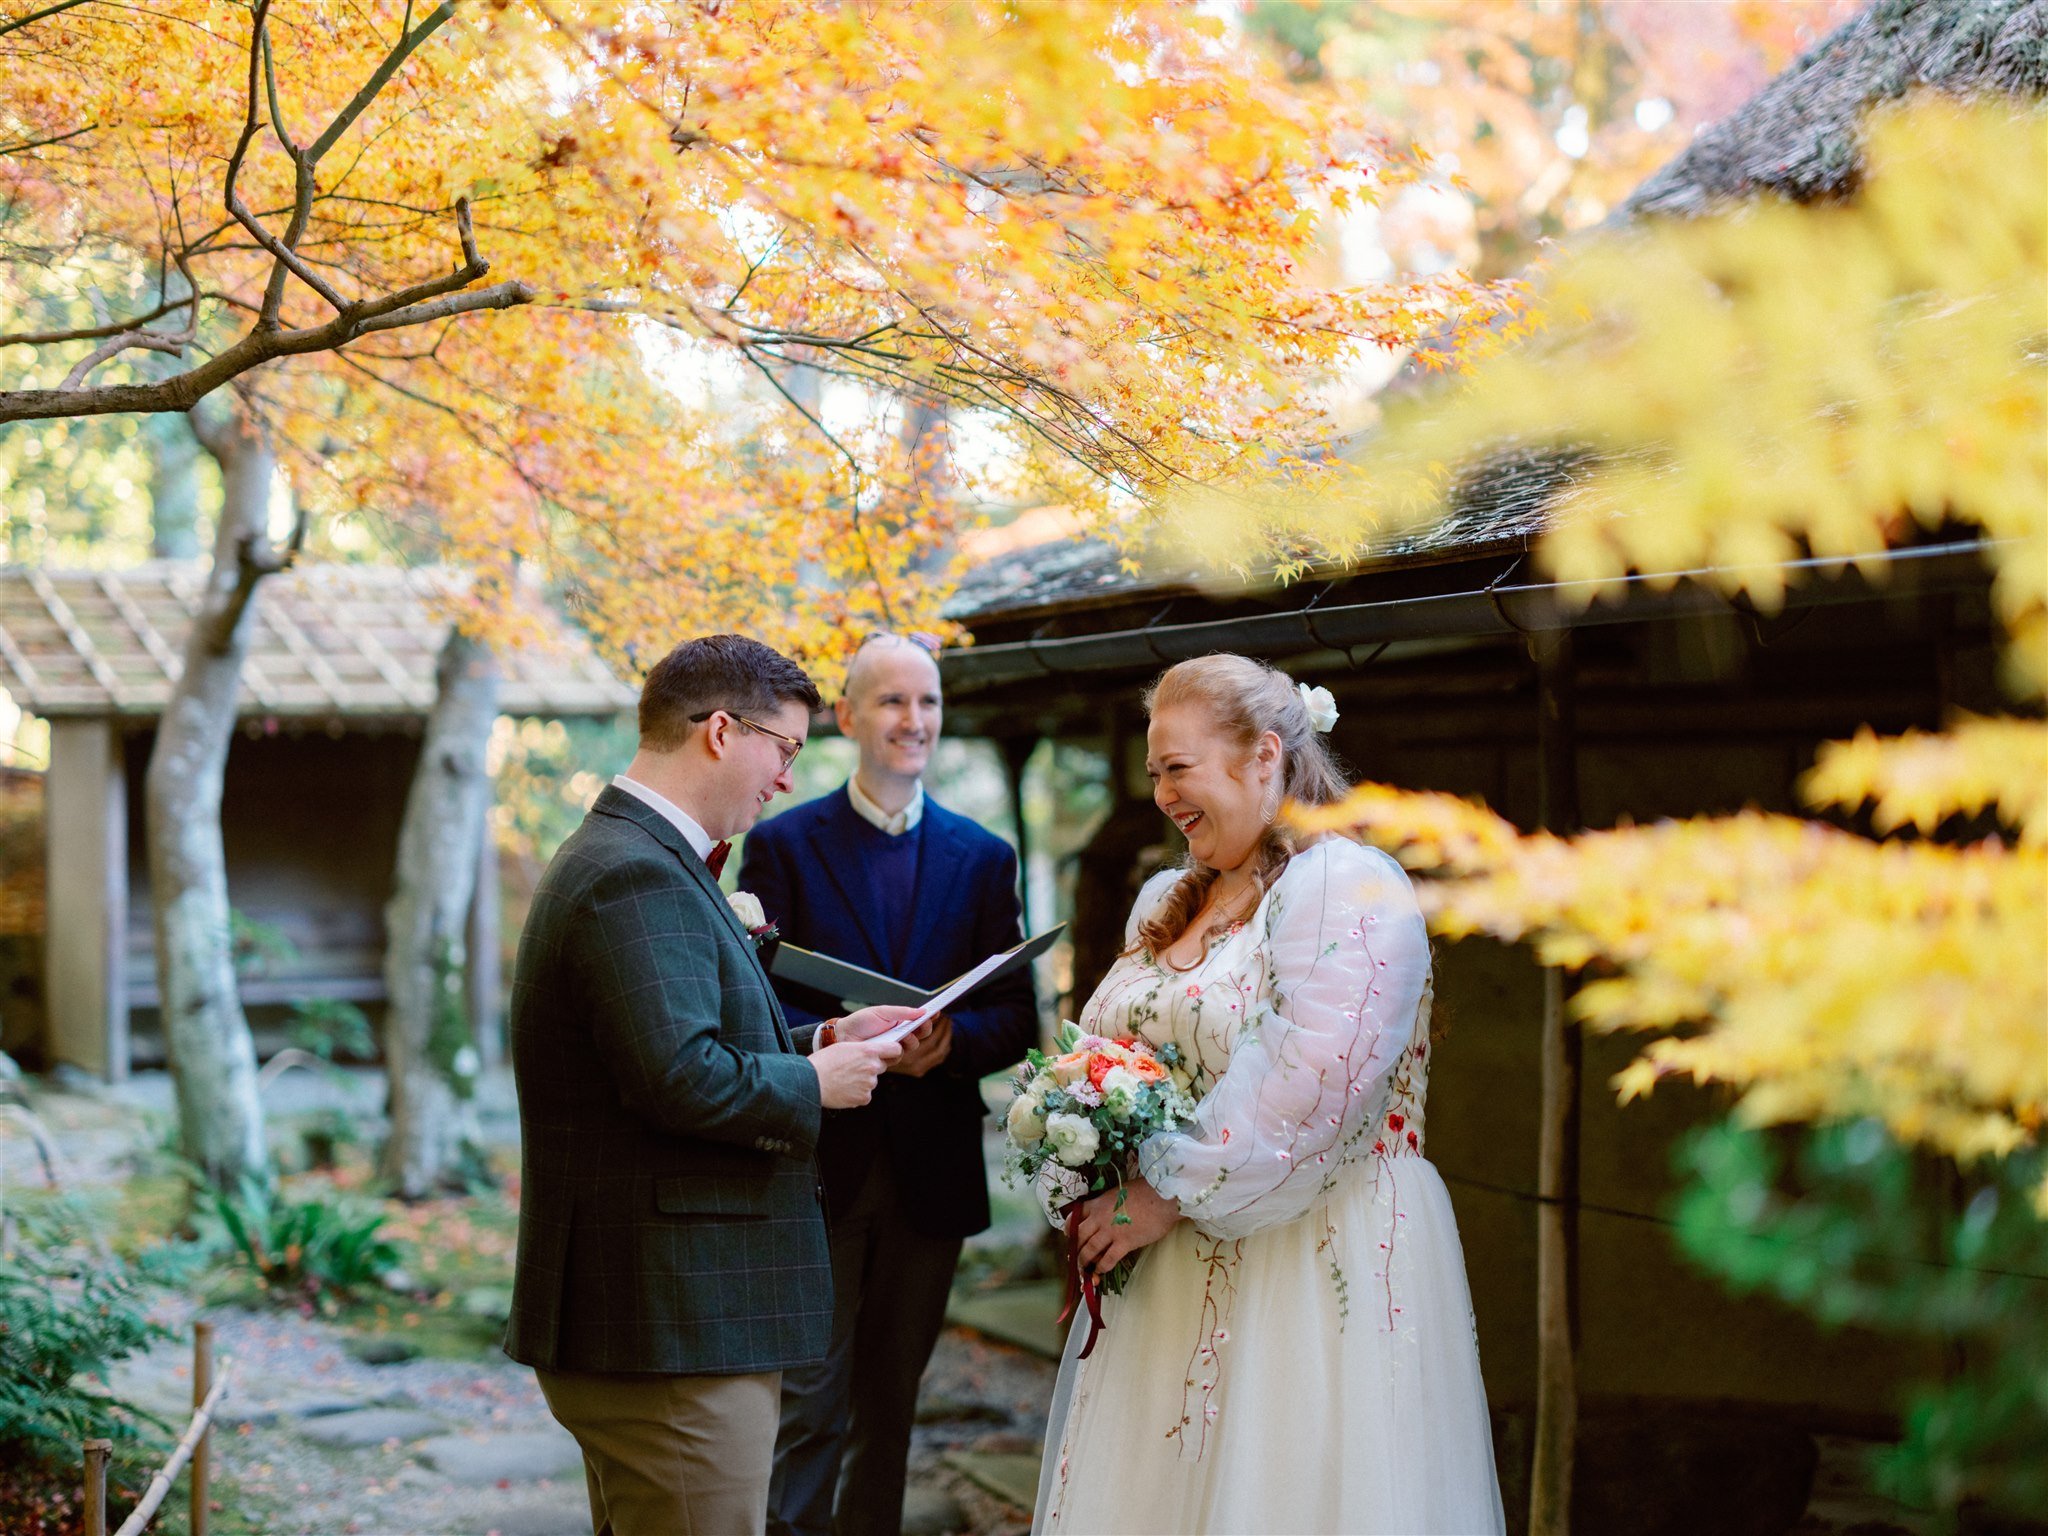 Intimate Elopement in a traditional Japanese Garden in Nara, Japan